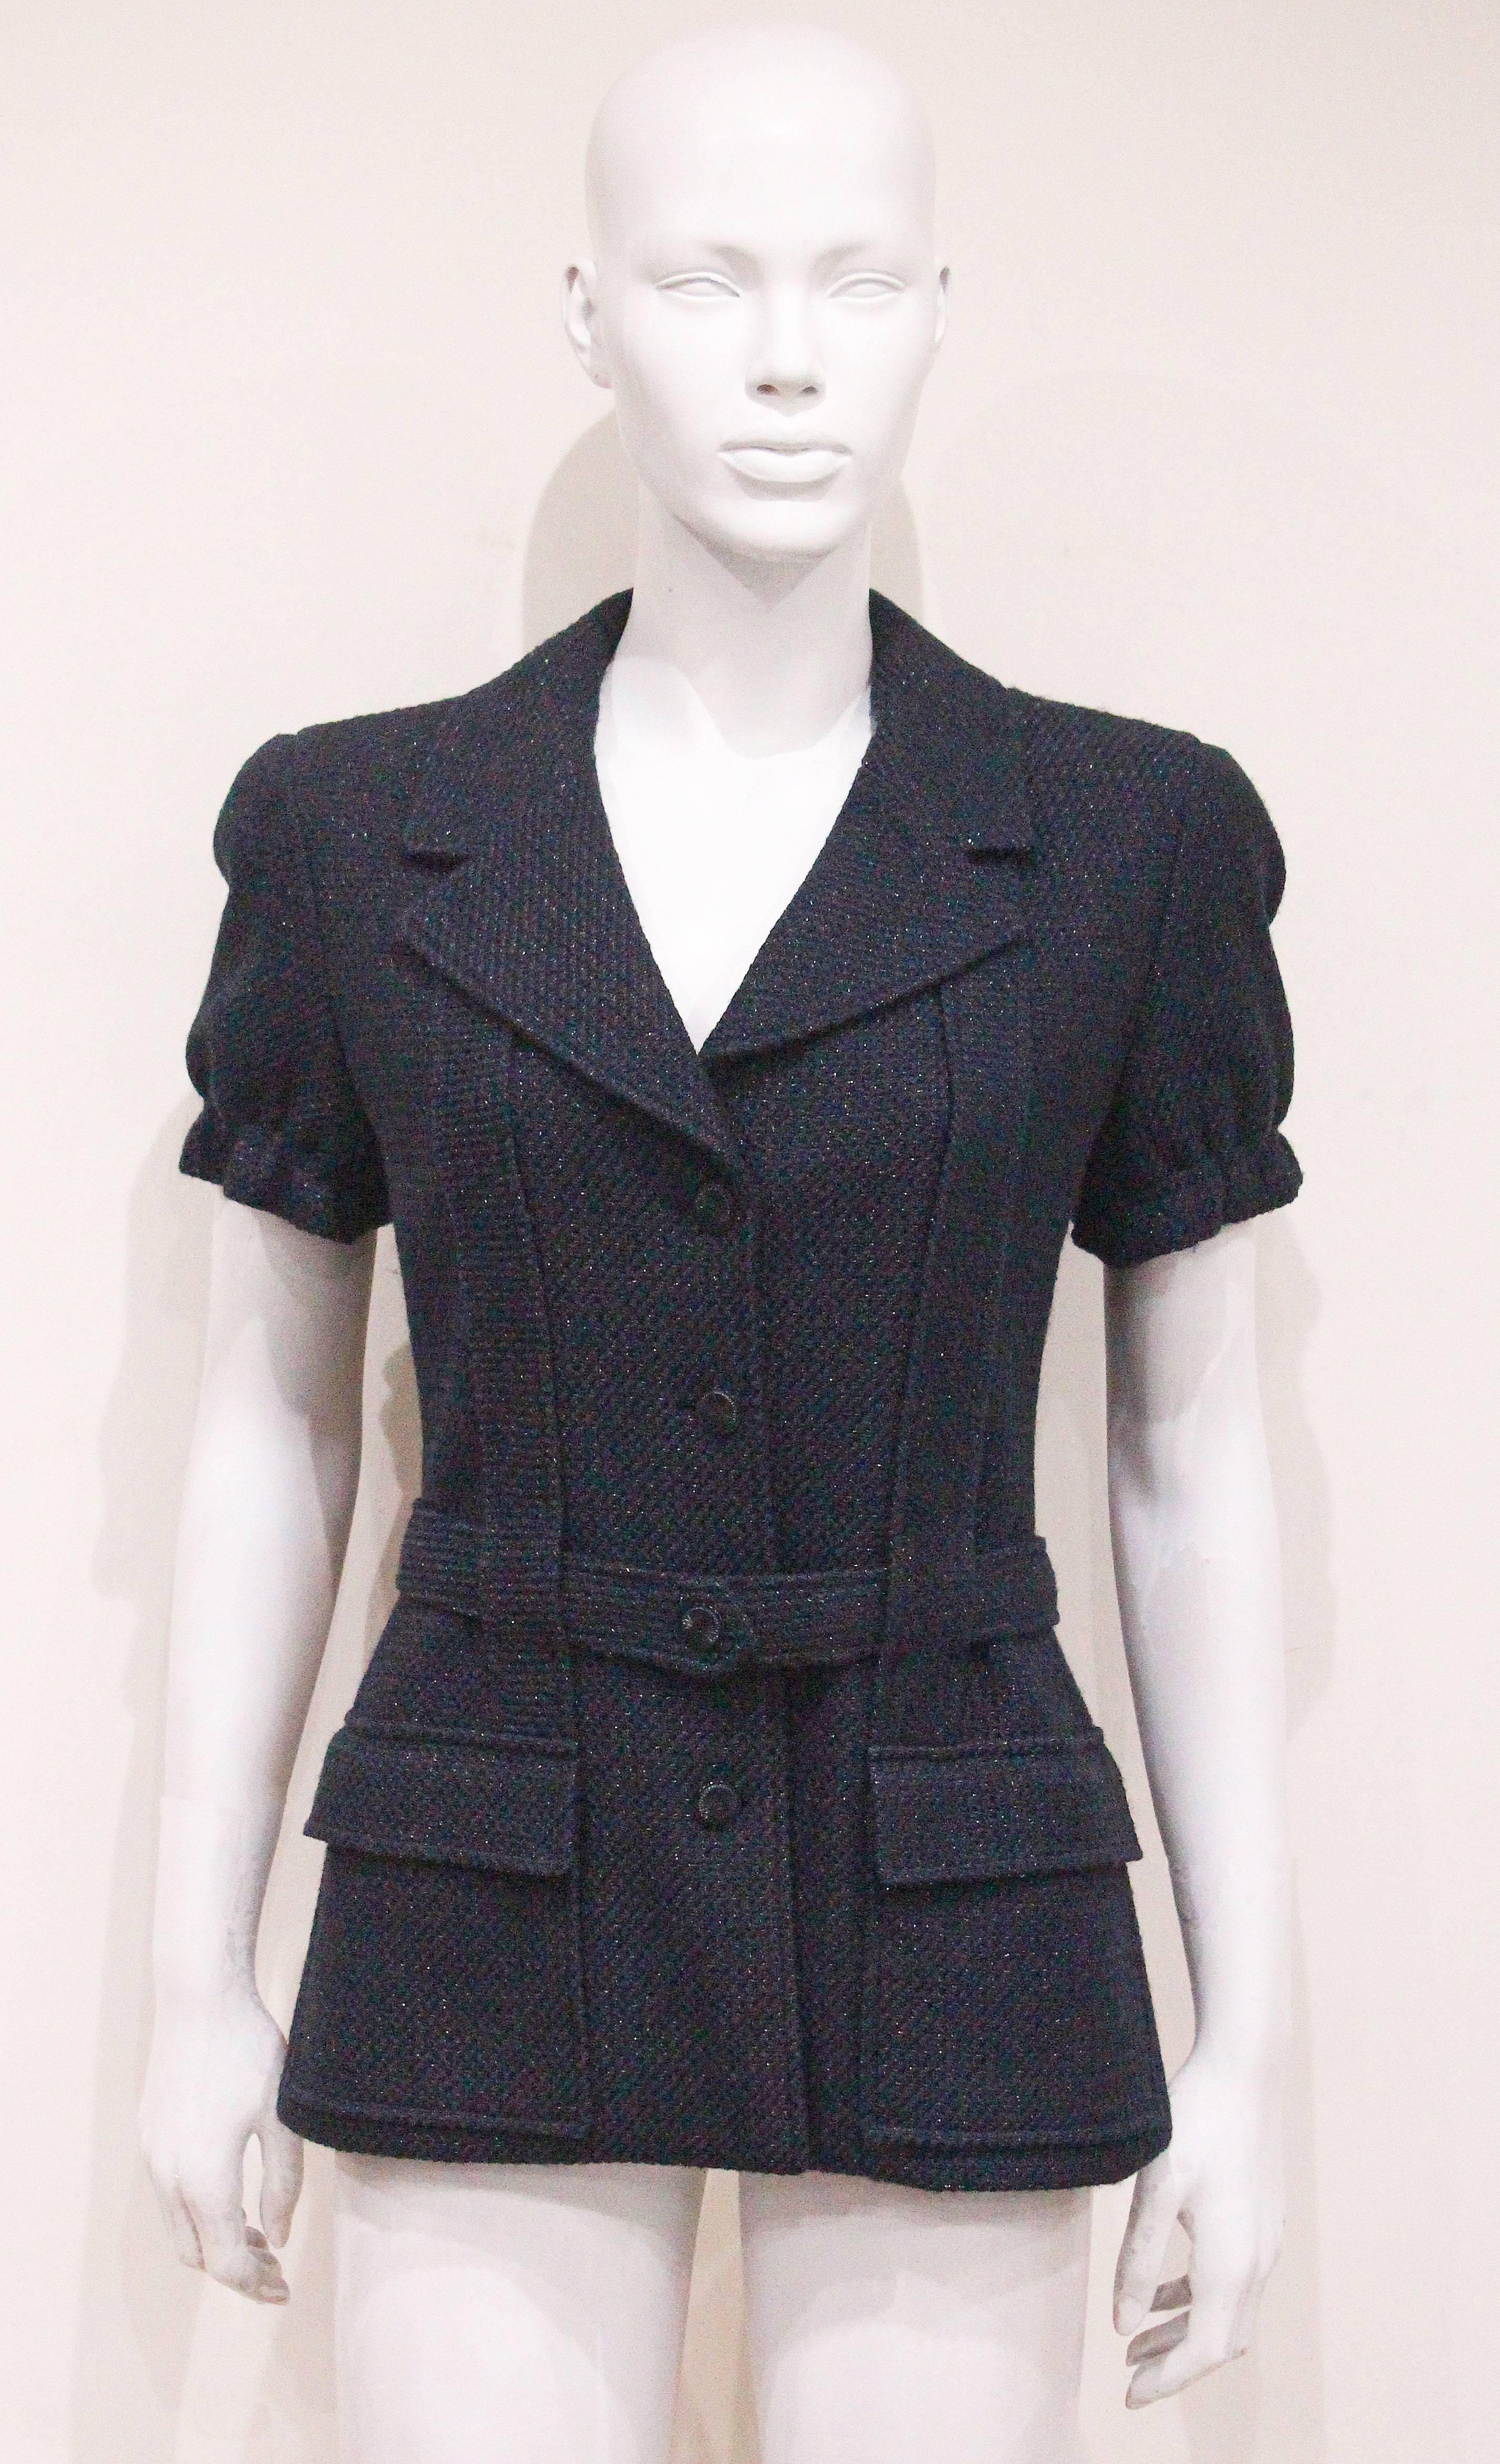 A Chanel tweed jacket from the Spring/Summer 2001 season. The jacket has short puff sleeves with elasticated cuffs, matching tweed belt, two front flap pockets, silk logo lining and interior metal chain hem. 

Fr 40 